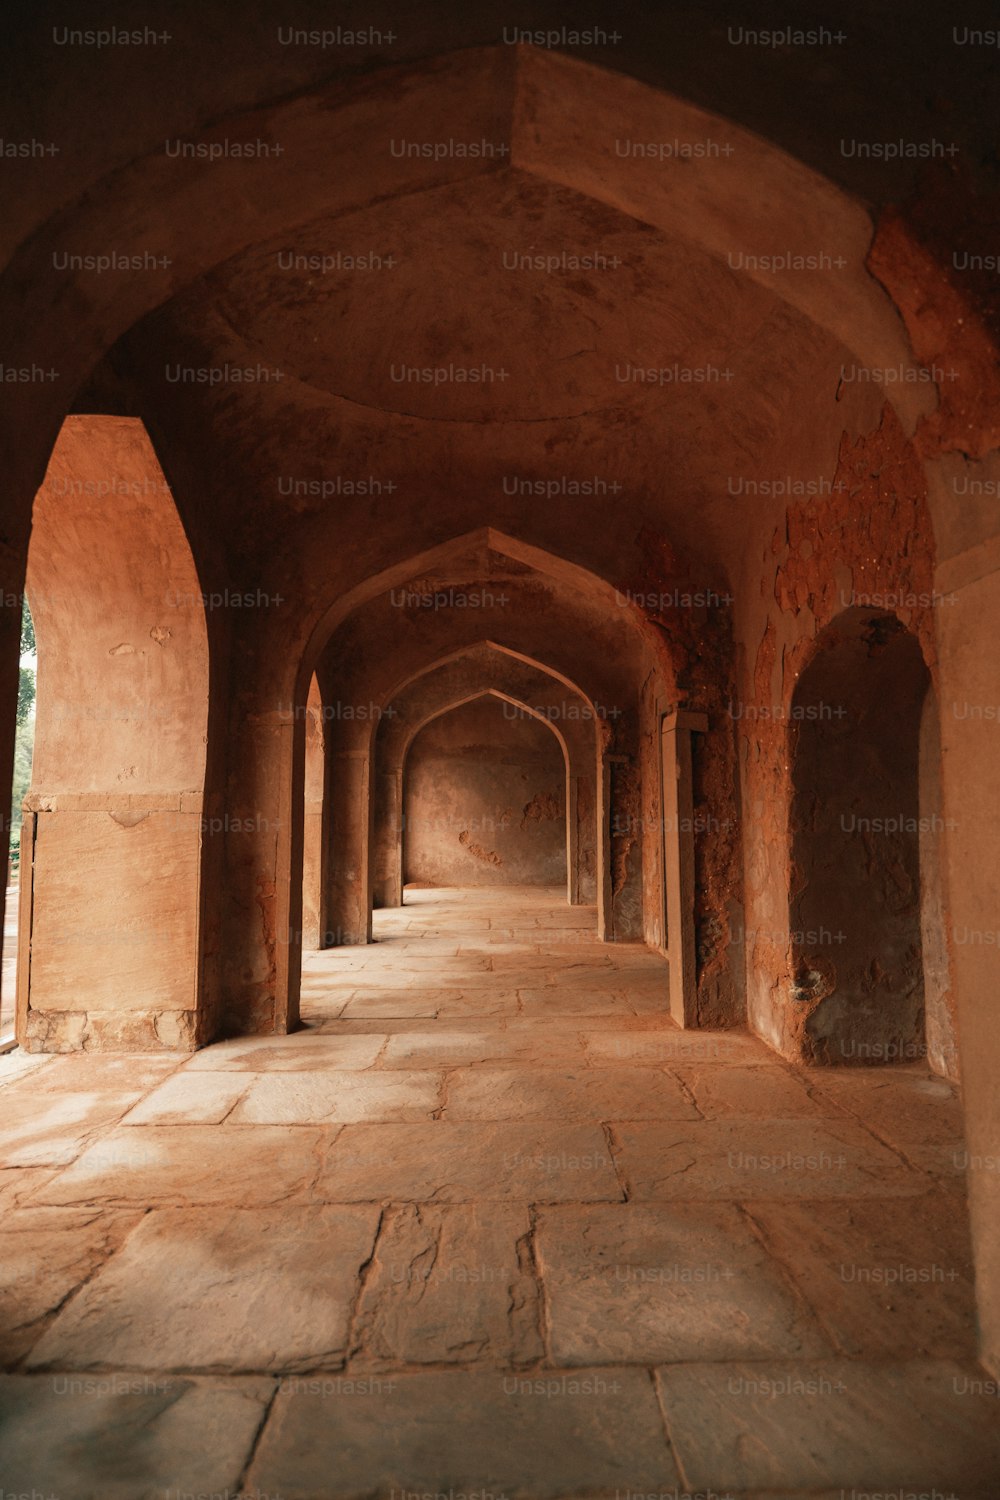 a long hallway with stone walls and arches